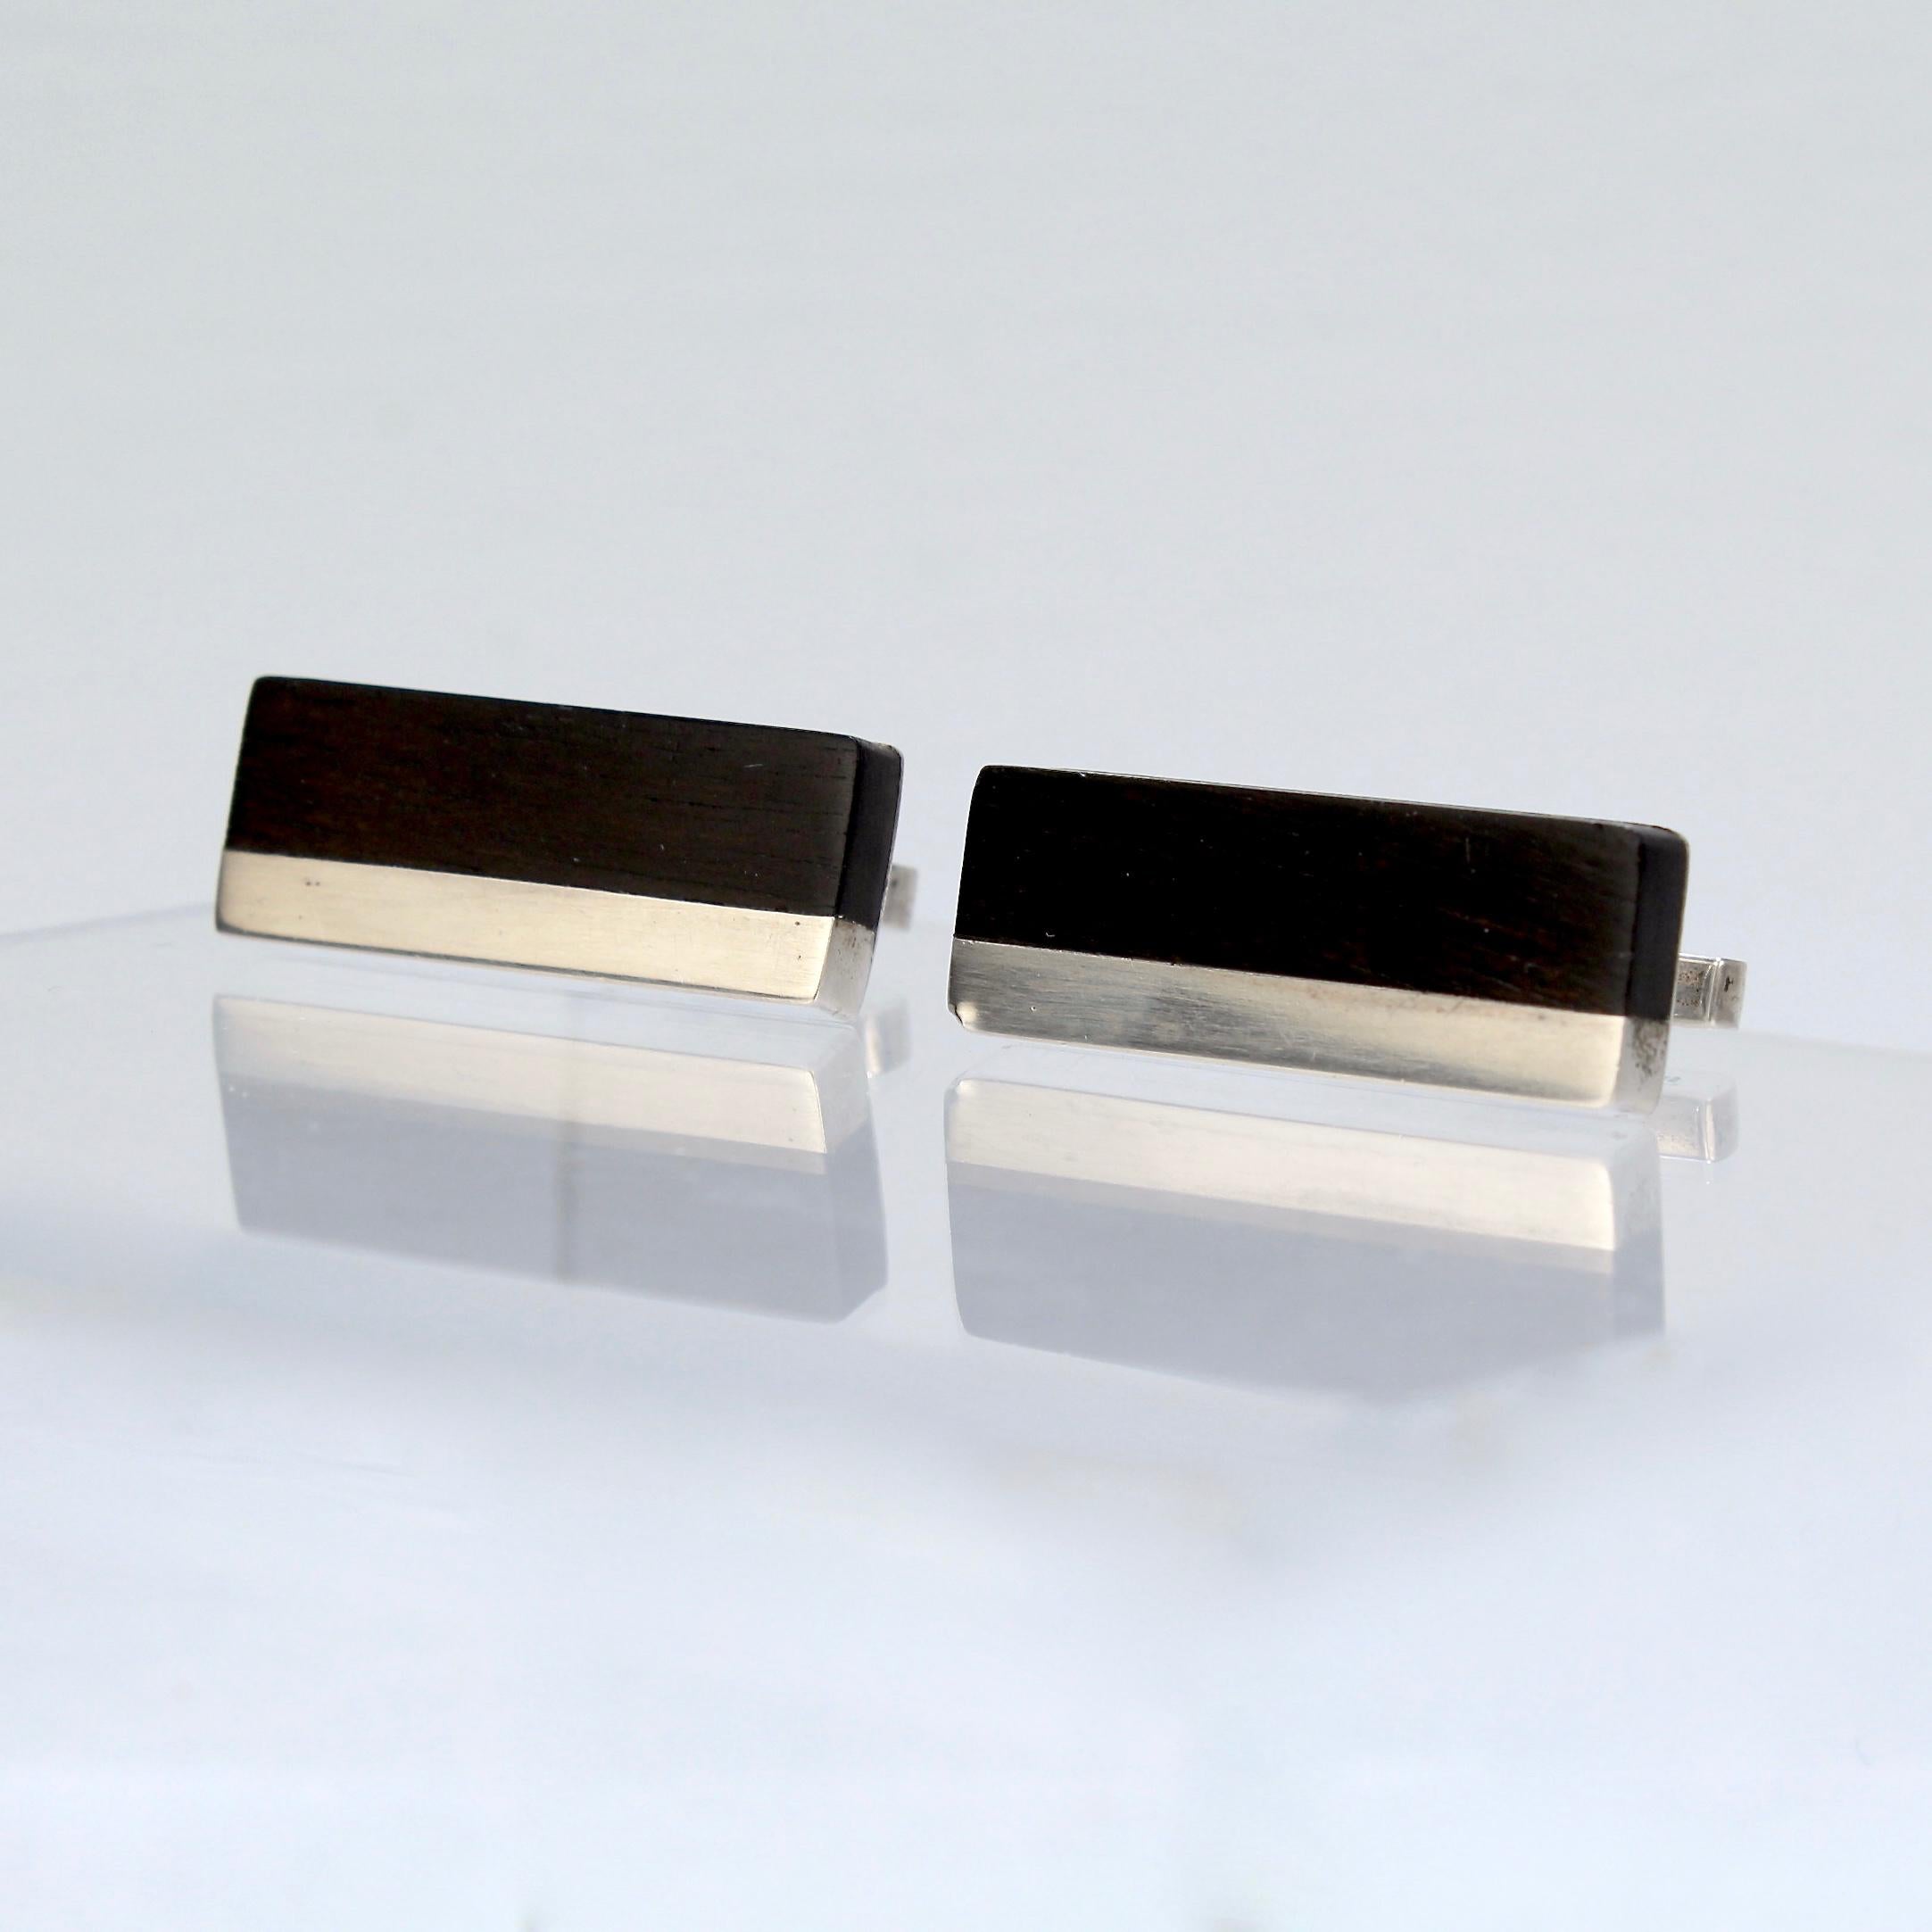 A fine pair of Milton Cavagnaro cufflinks.

In sterling silver with inlaid ebony.

Marked: Sterling for silver fineness and Cavagnaro.

Great cufflinks from the renowned California (Bay Area) Mid-Century artist and jewelry maker!

Width: ca.